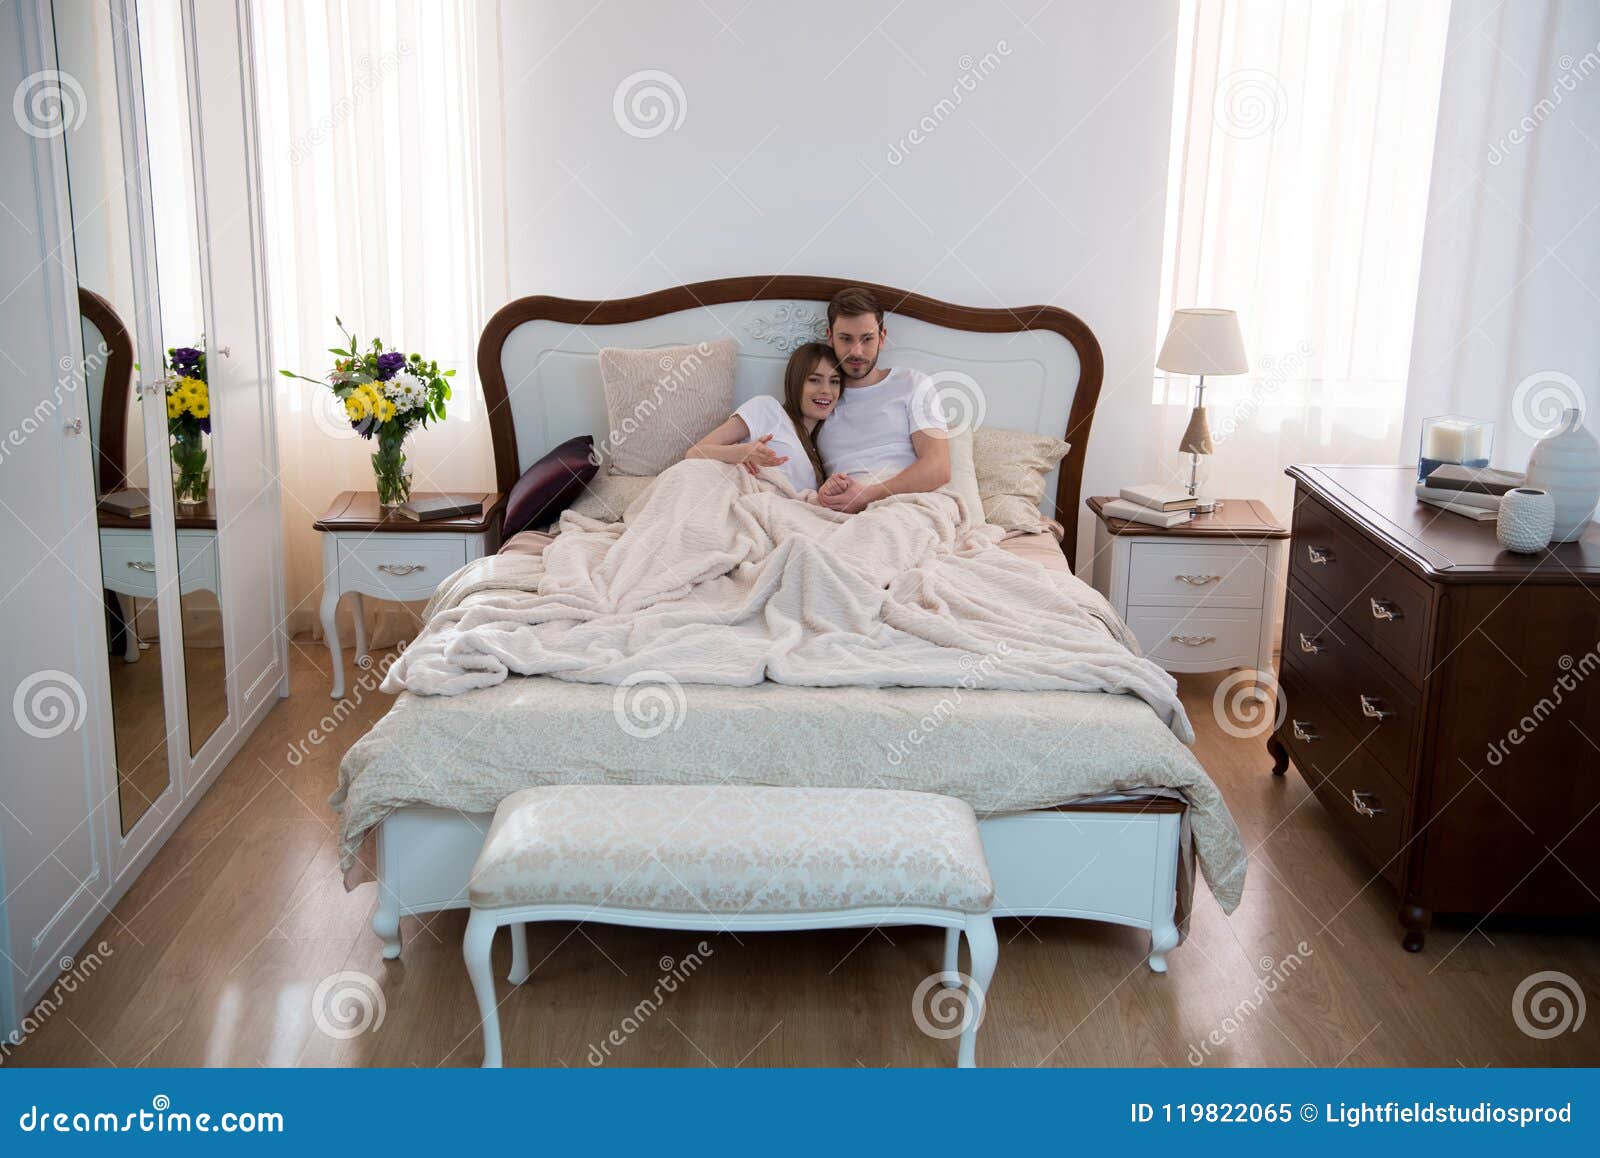 High Angle View Of Happy Couple Hugging In Cozy Stock Image